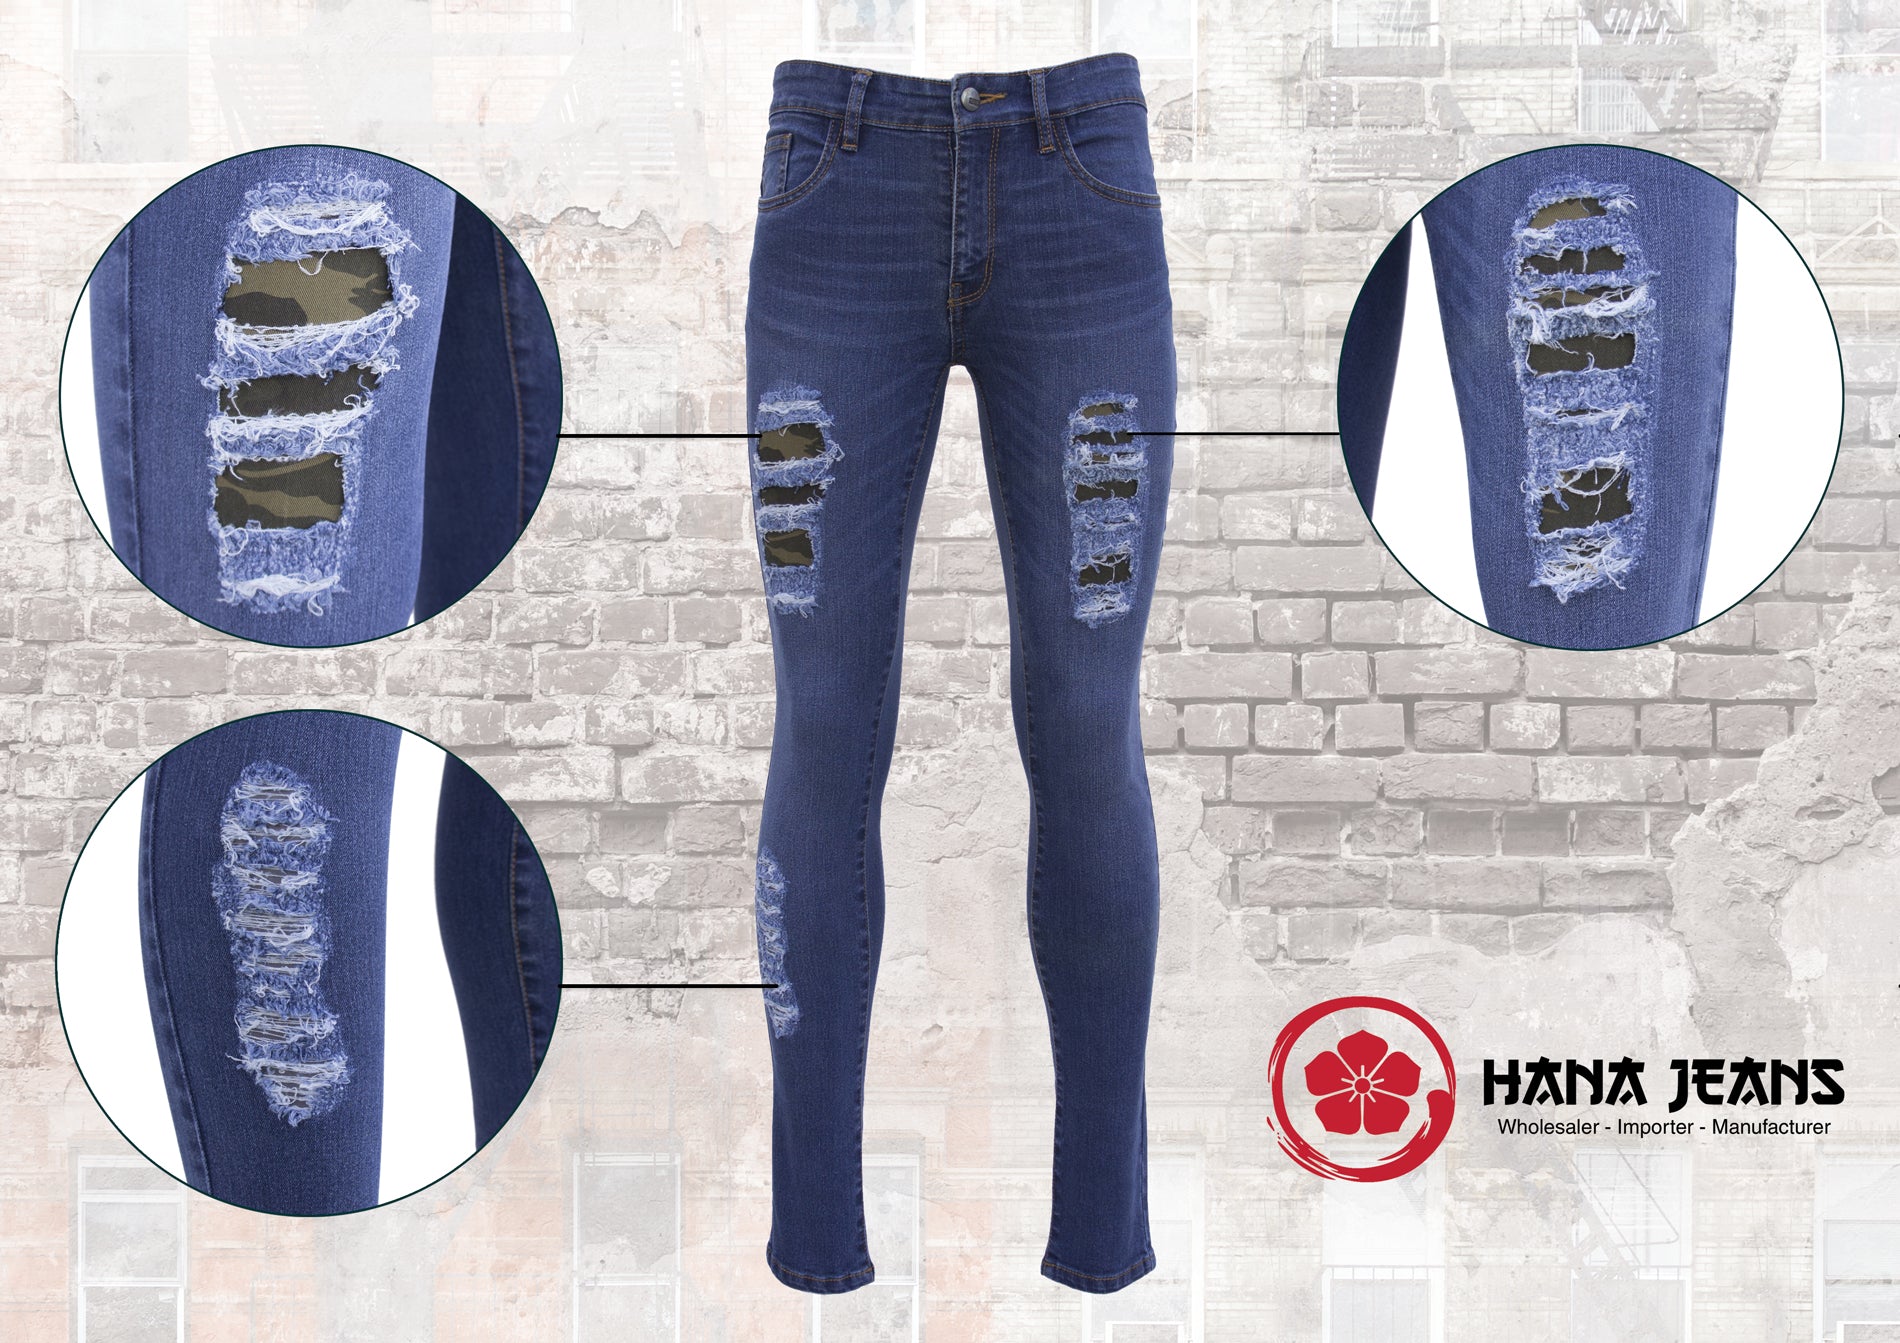 Women's Premium Denim with Distressed Camouflage Lining Accent.